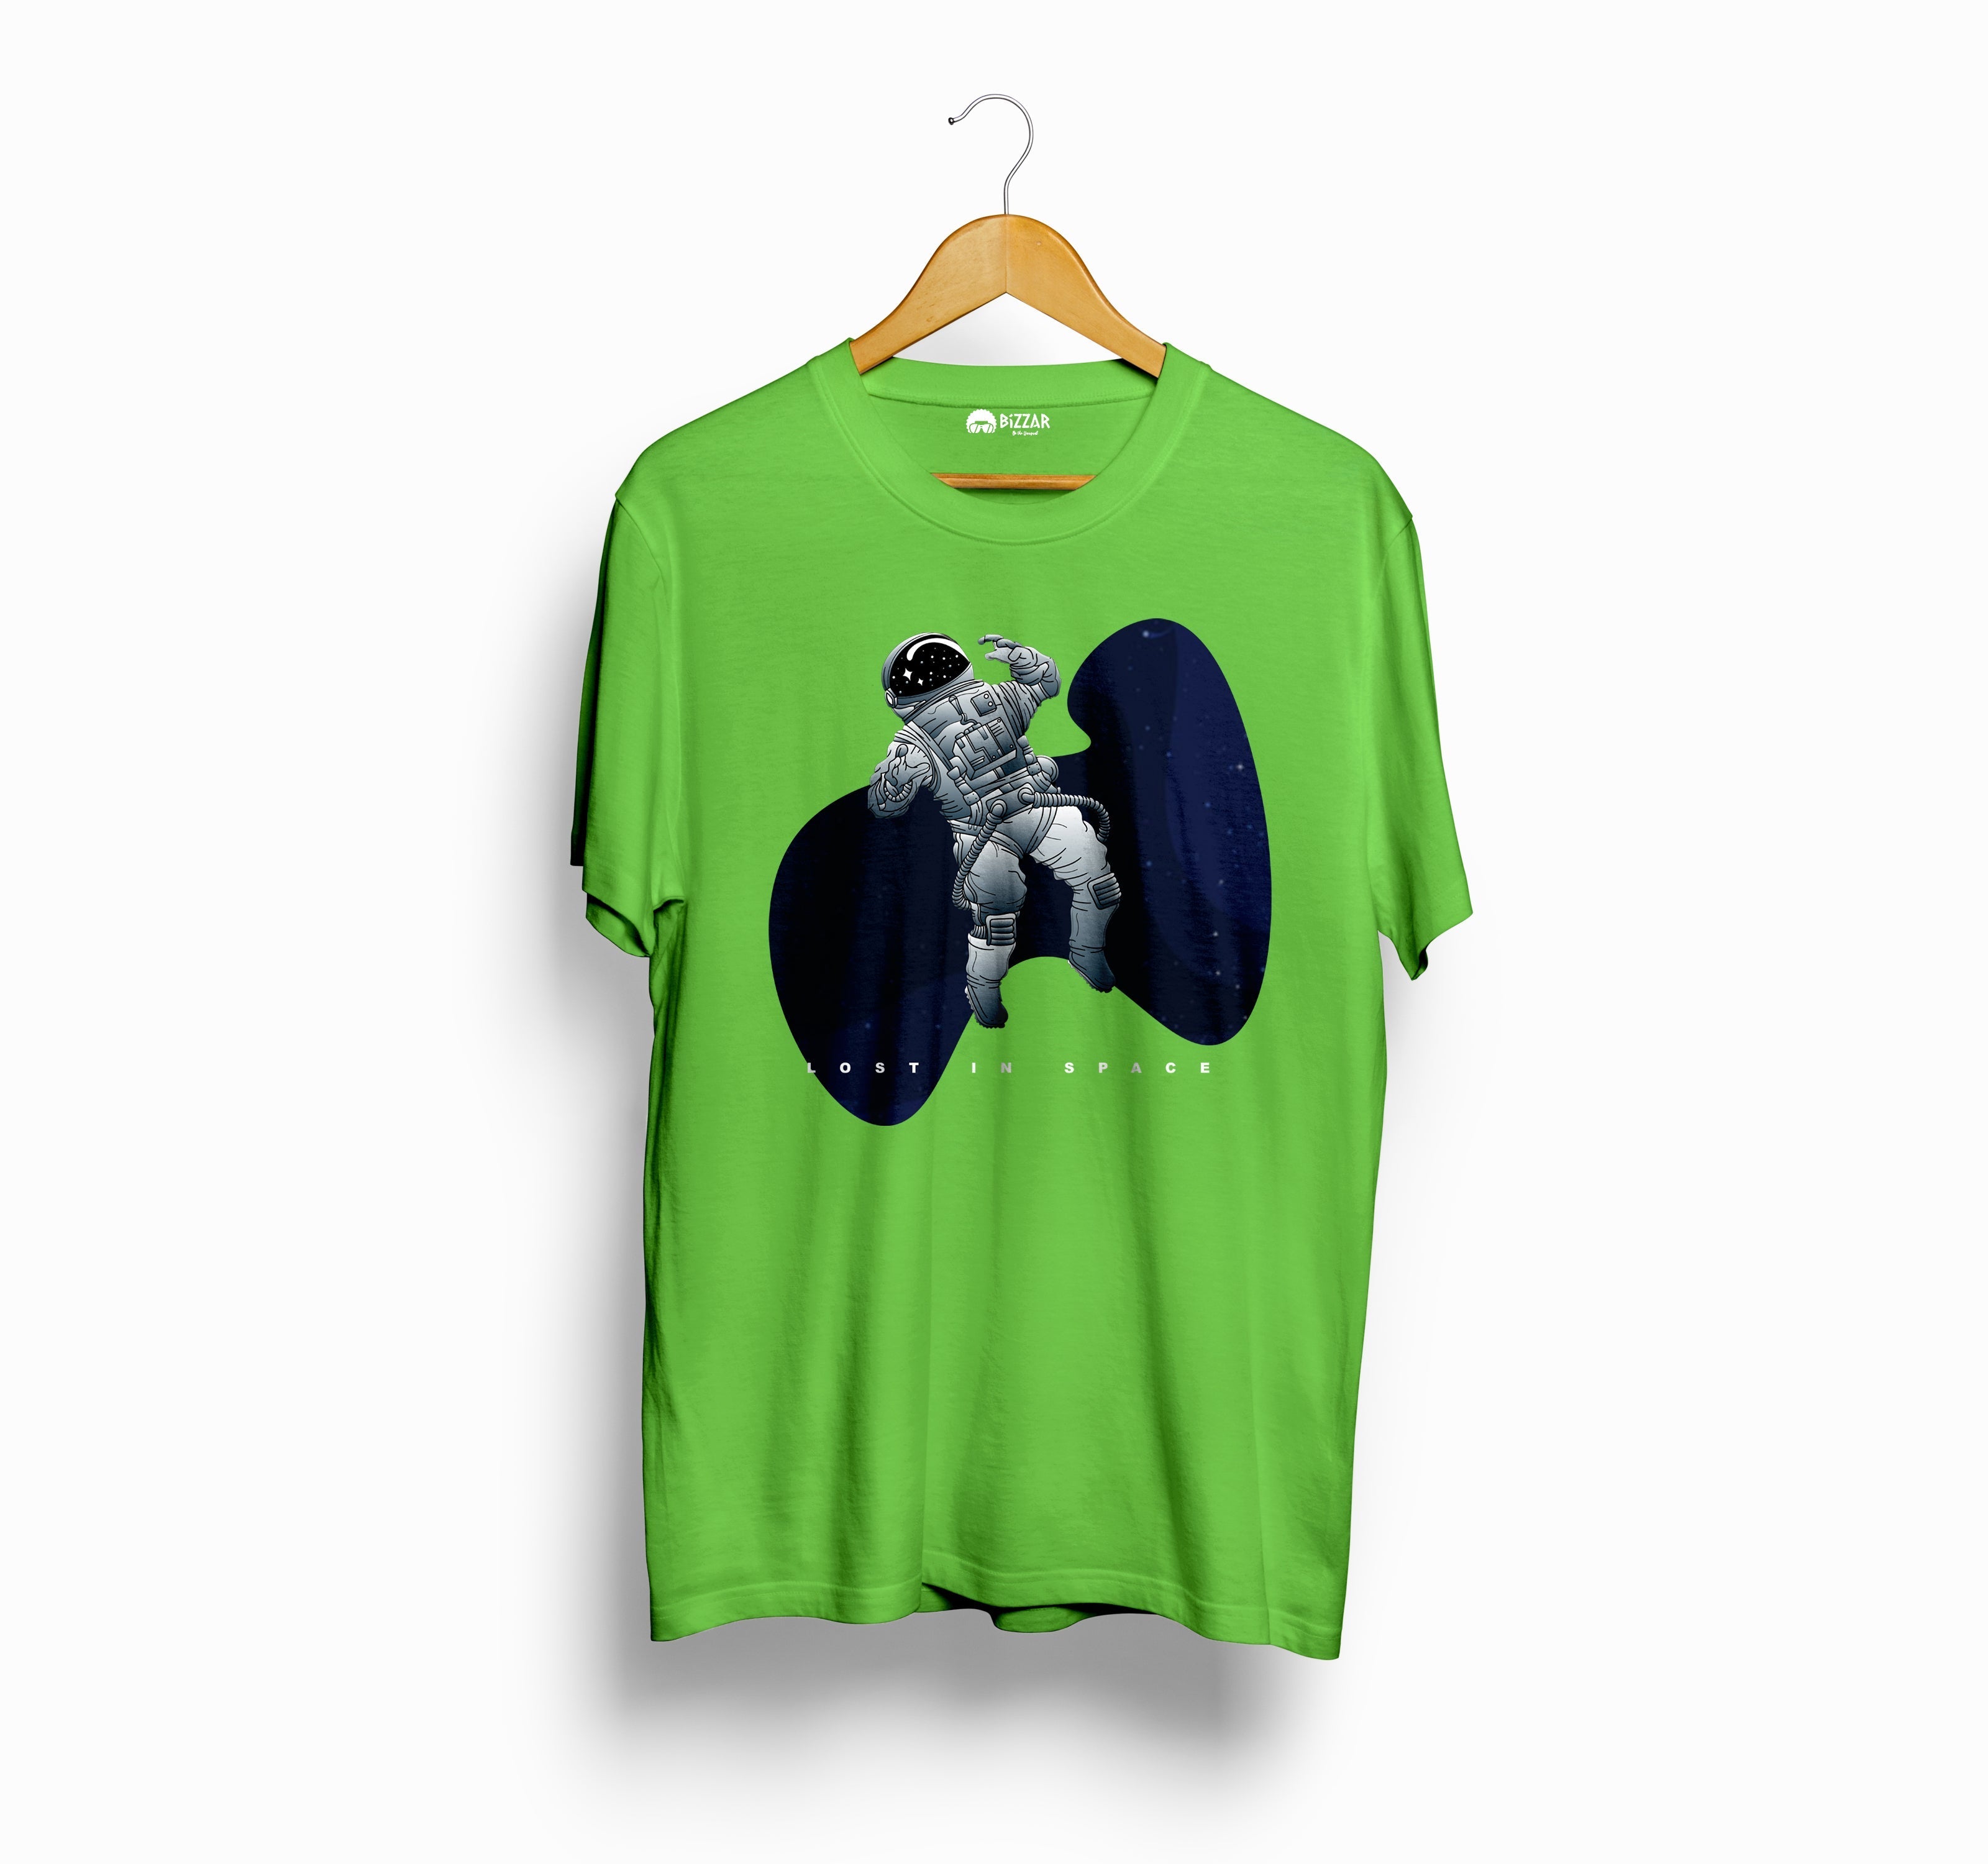 Bizzar's Lost in Space Liril Green T-Shirt